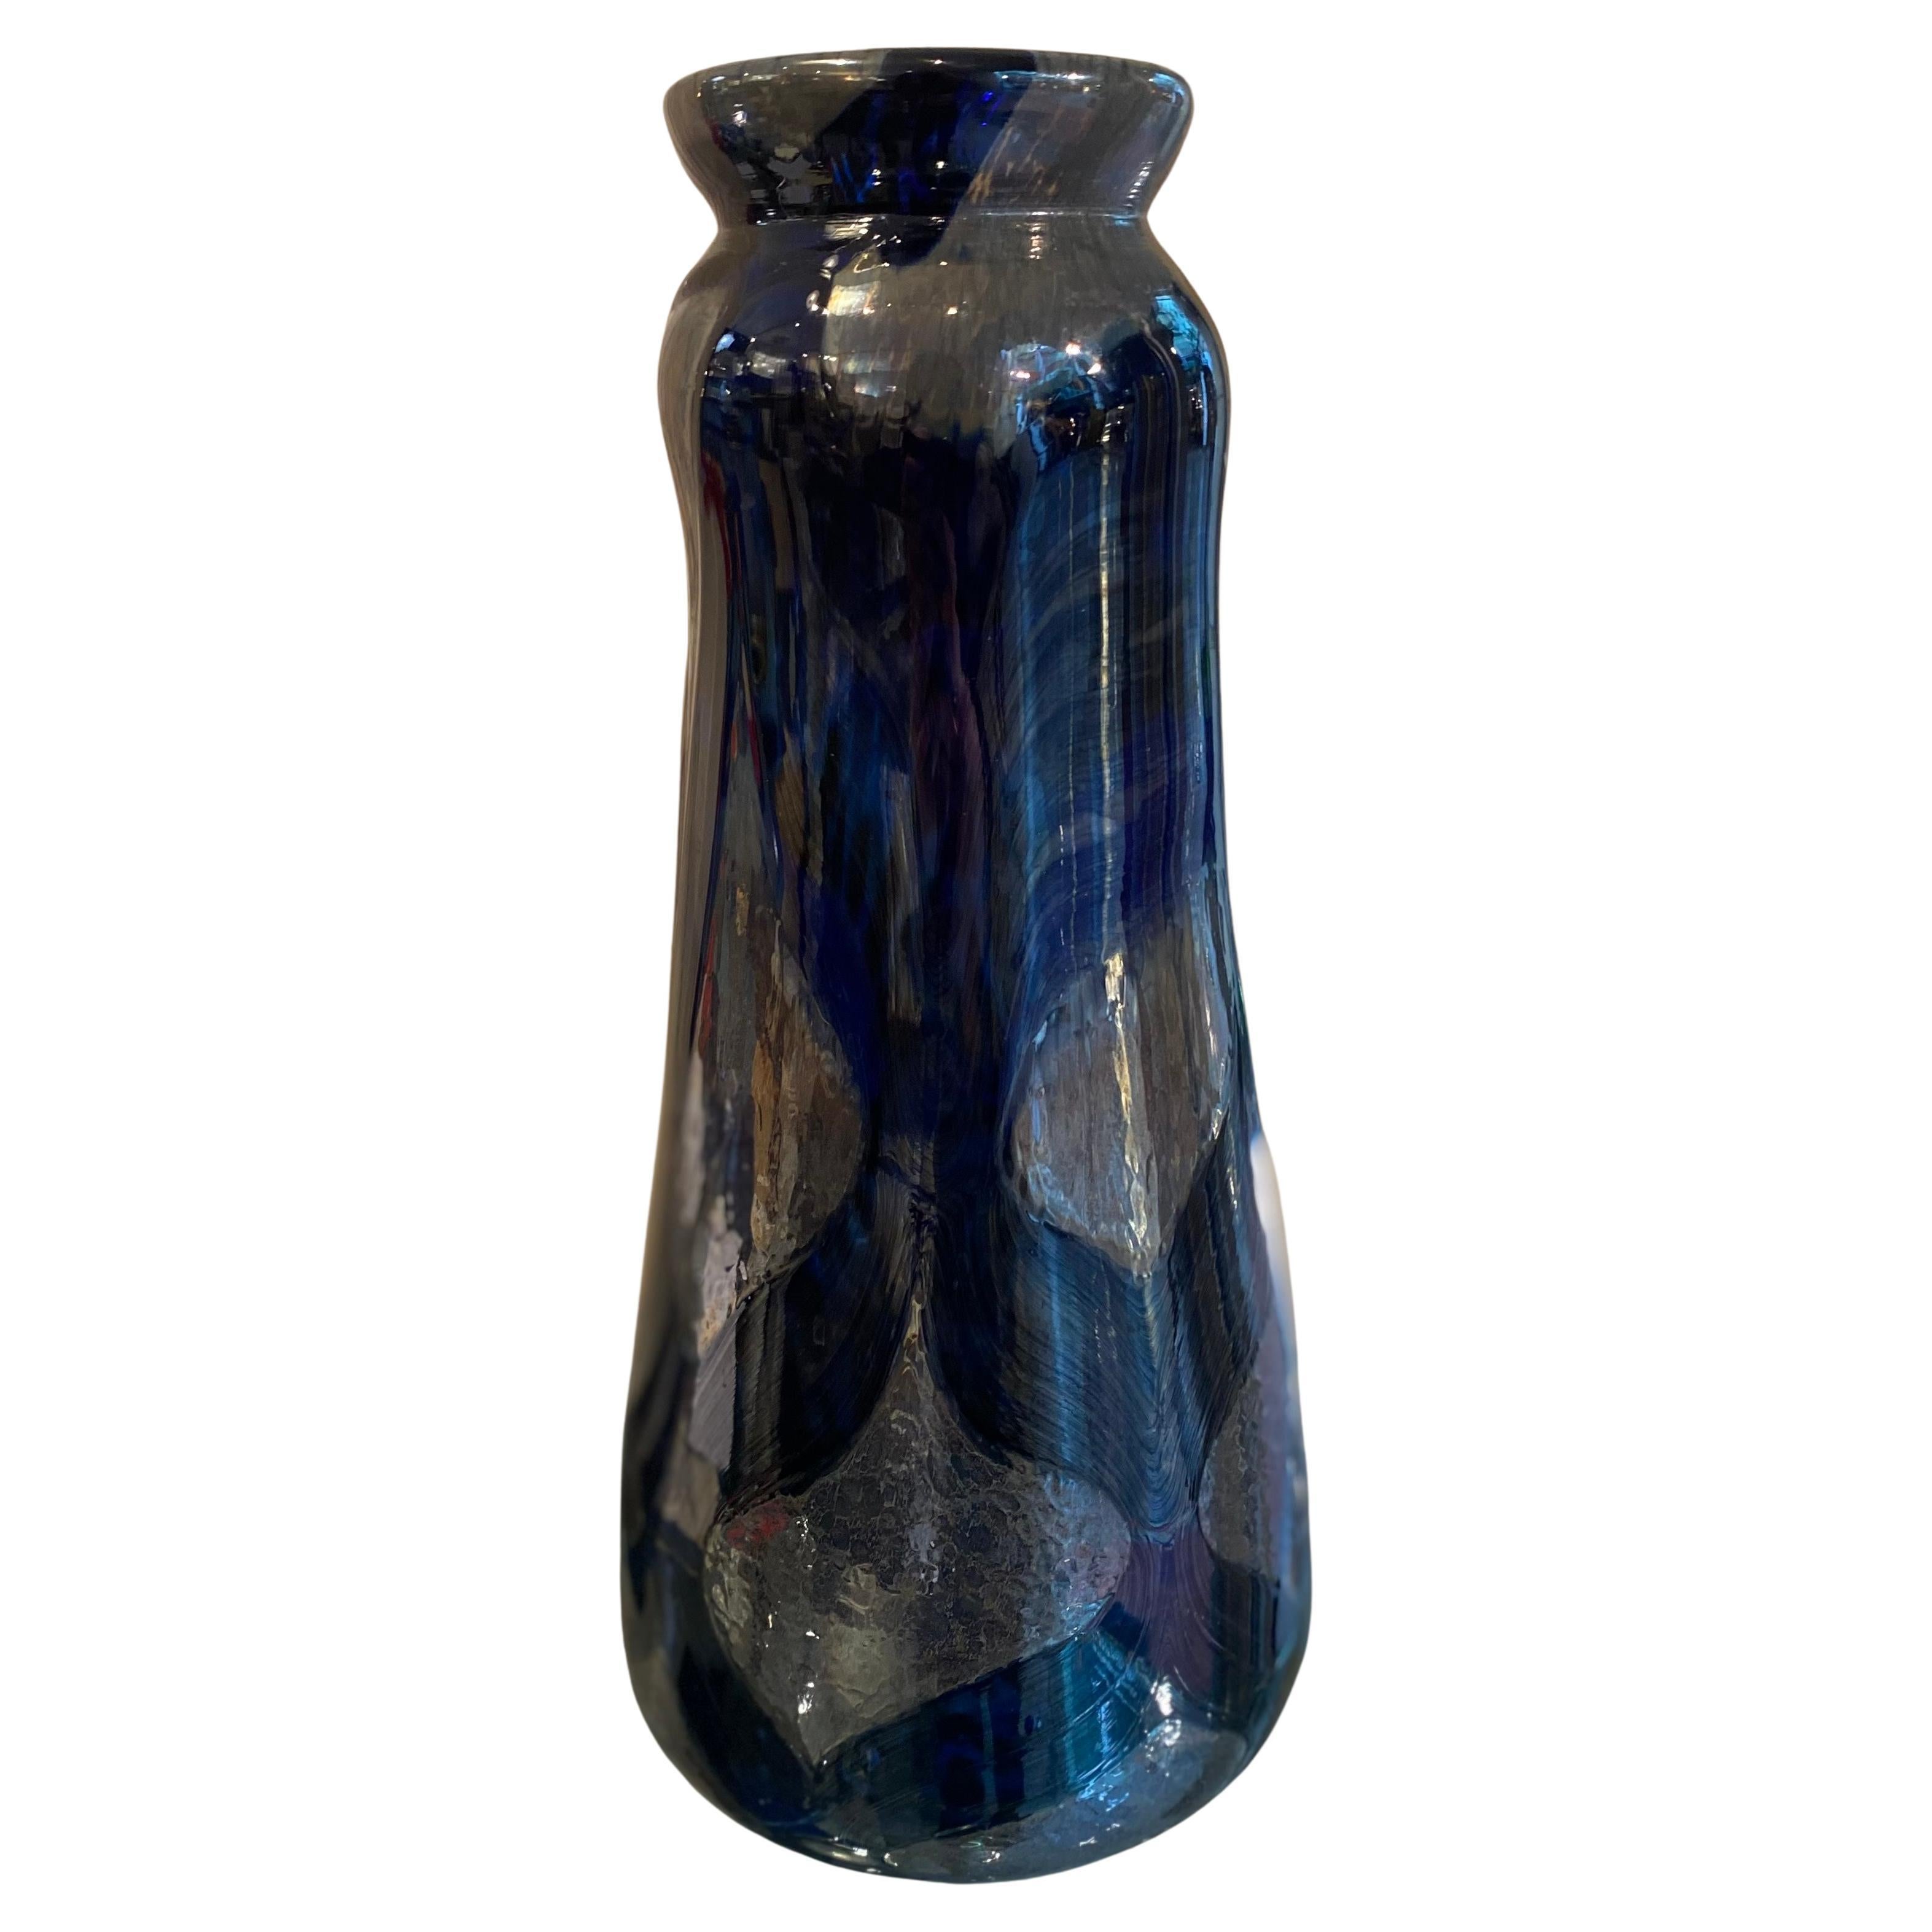 Glass Vase from Biot Signed Novaro and Dated on the Bottom of the Vase 1977 For Sale